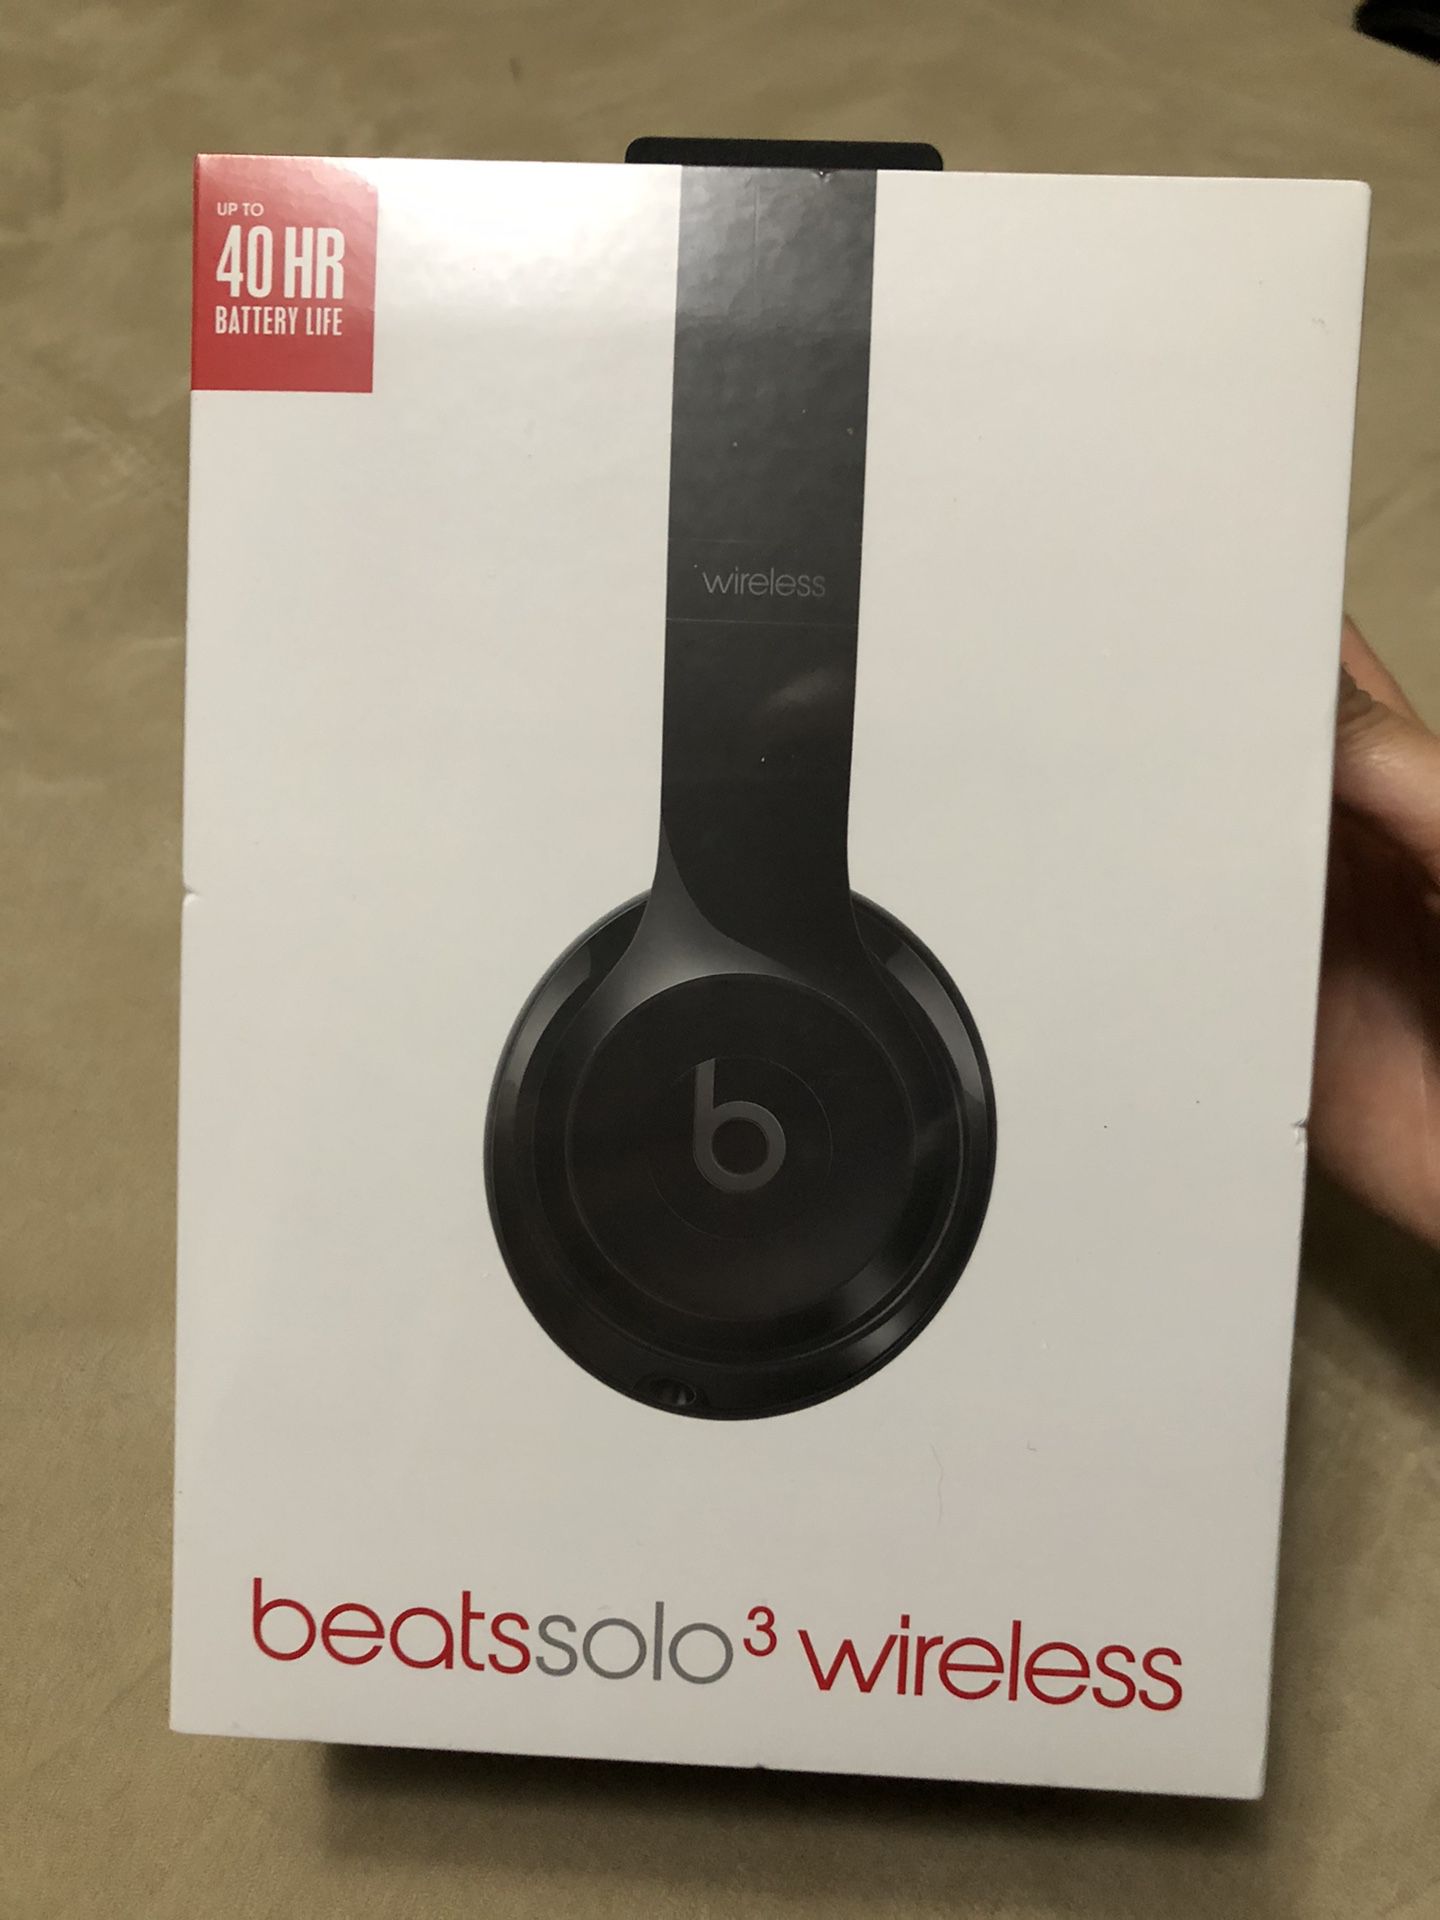 Beats solo 3 wireless. Brand new. Never opened. Still sealed.